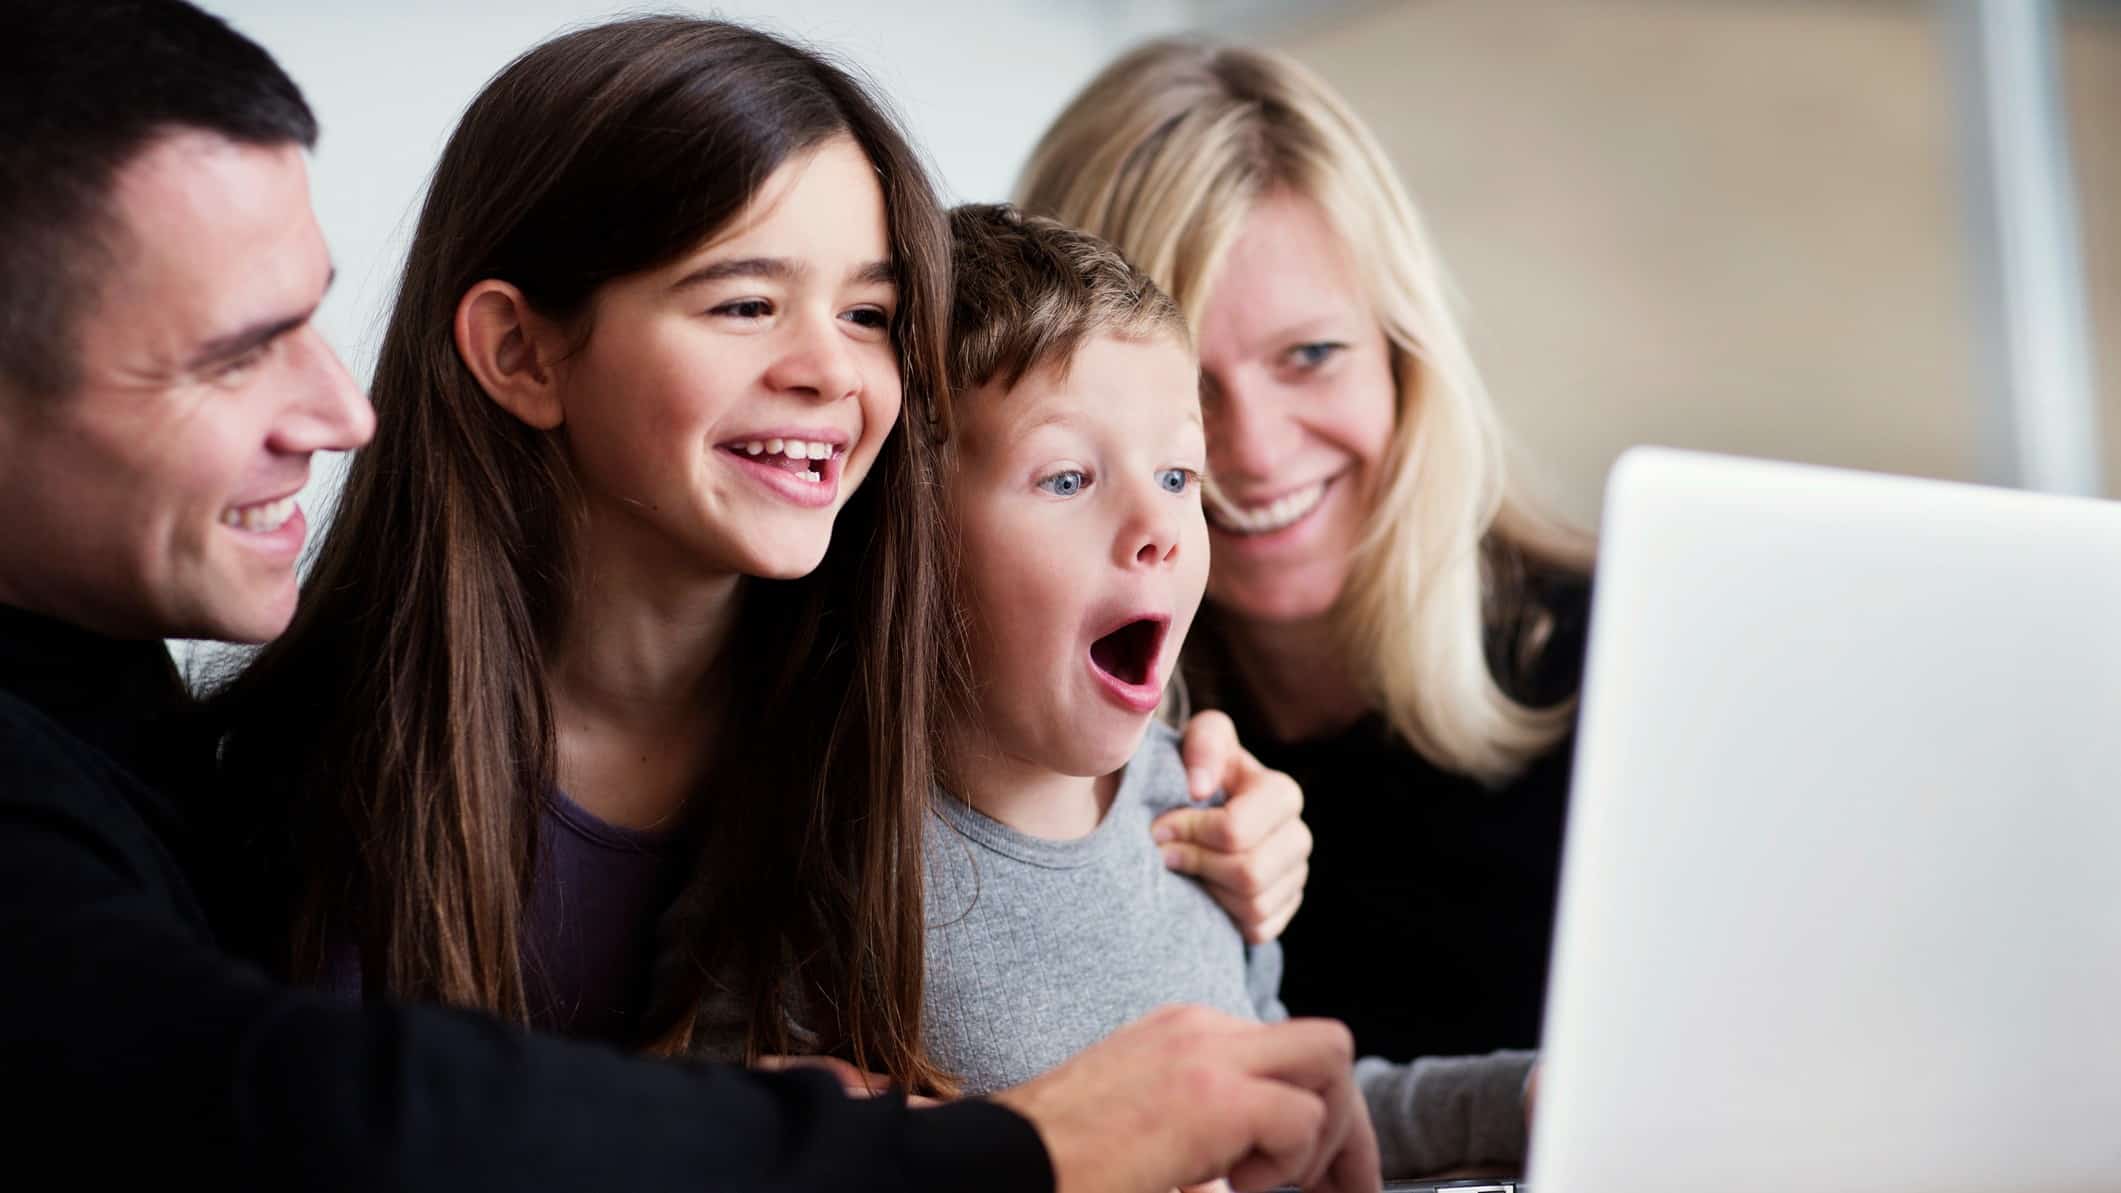 Family smile and laugh as they look at a laptop.